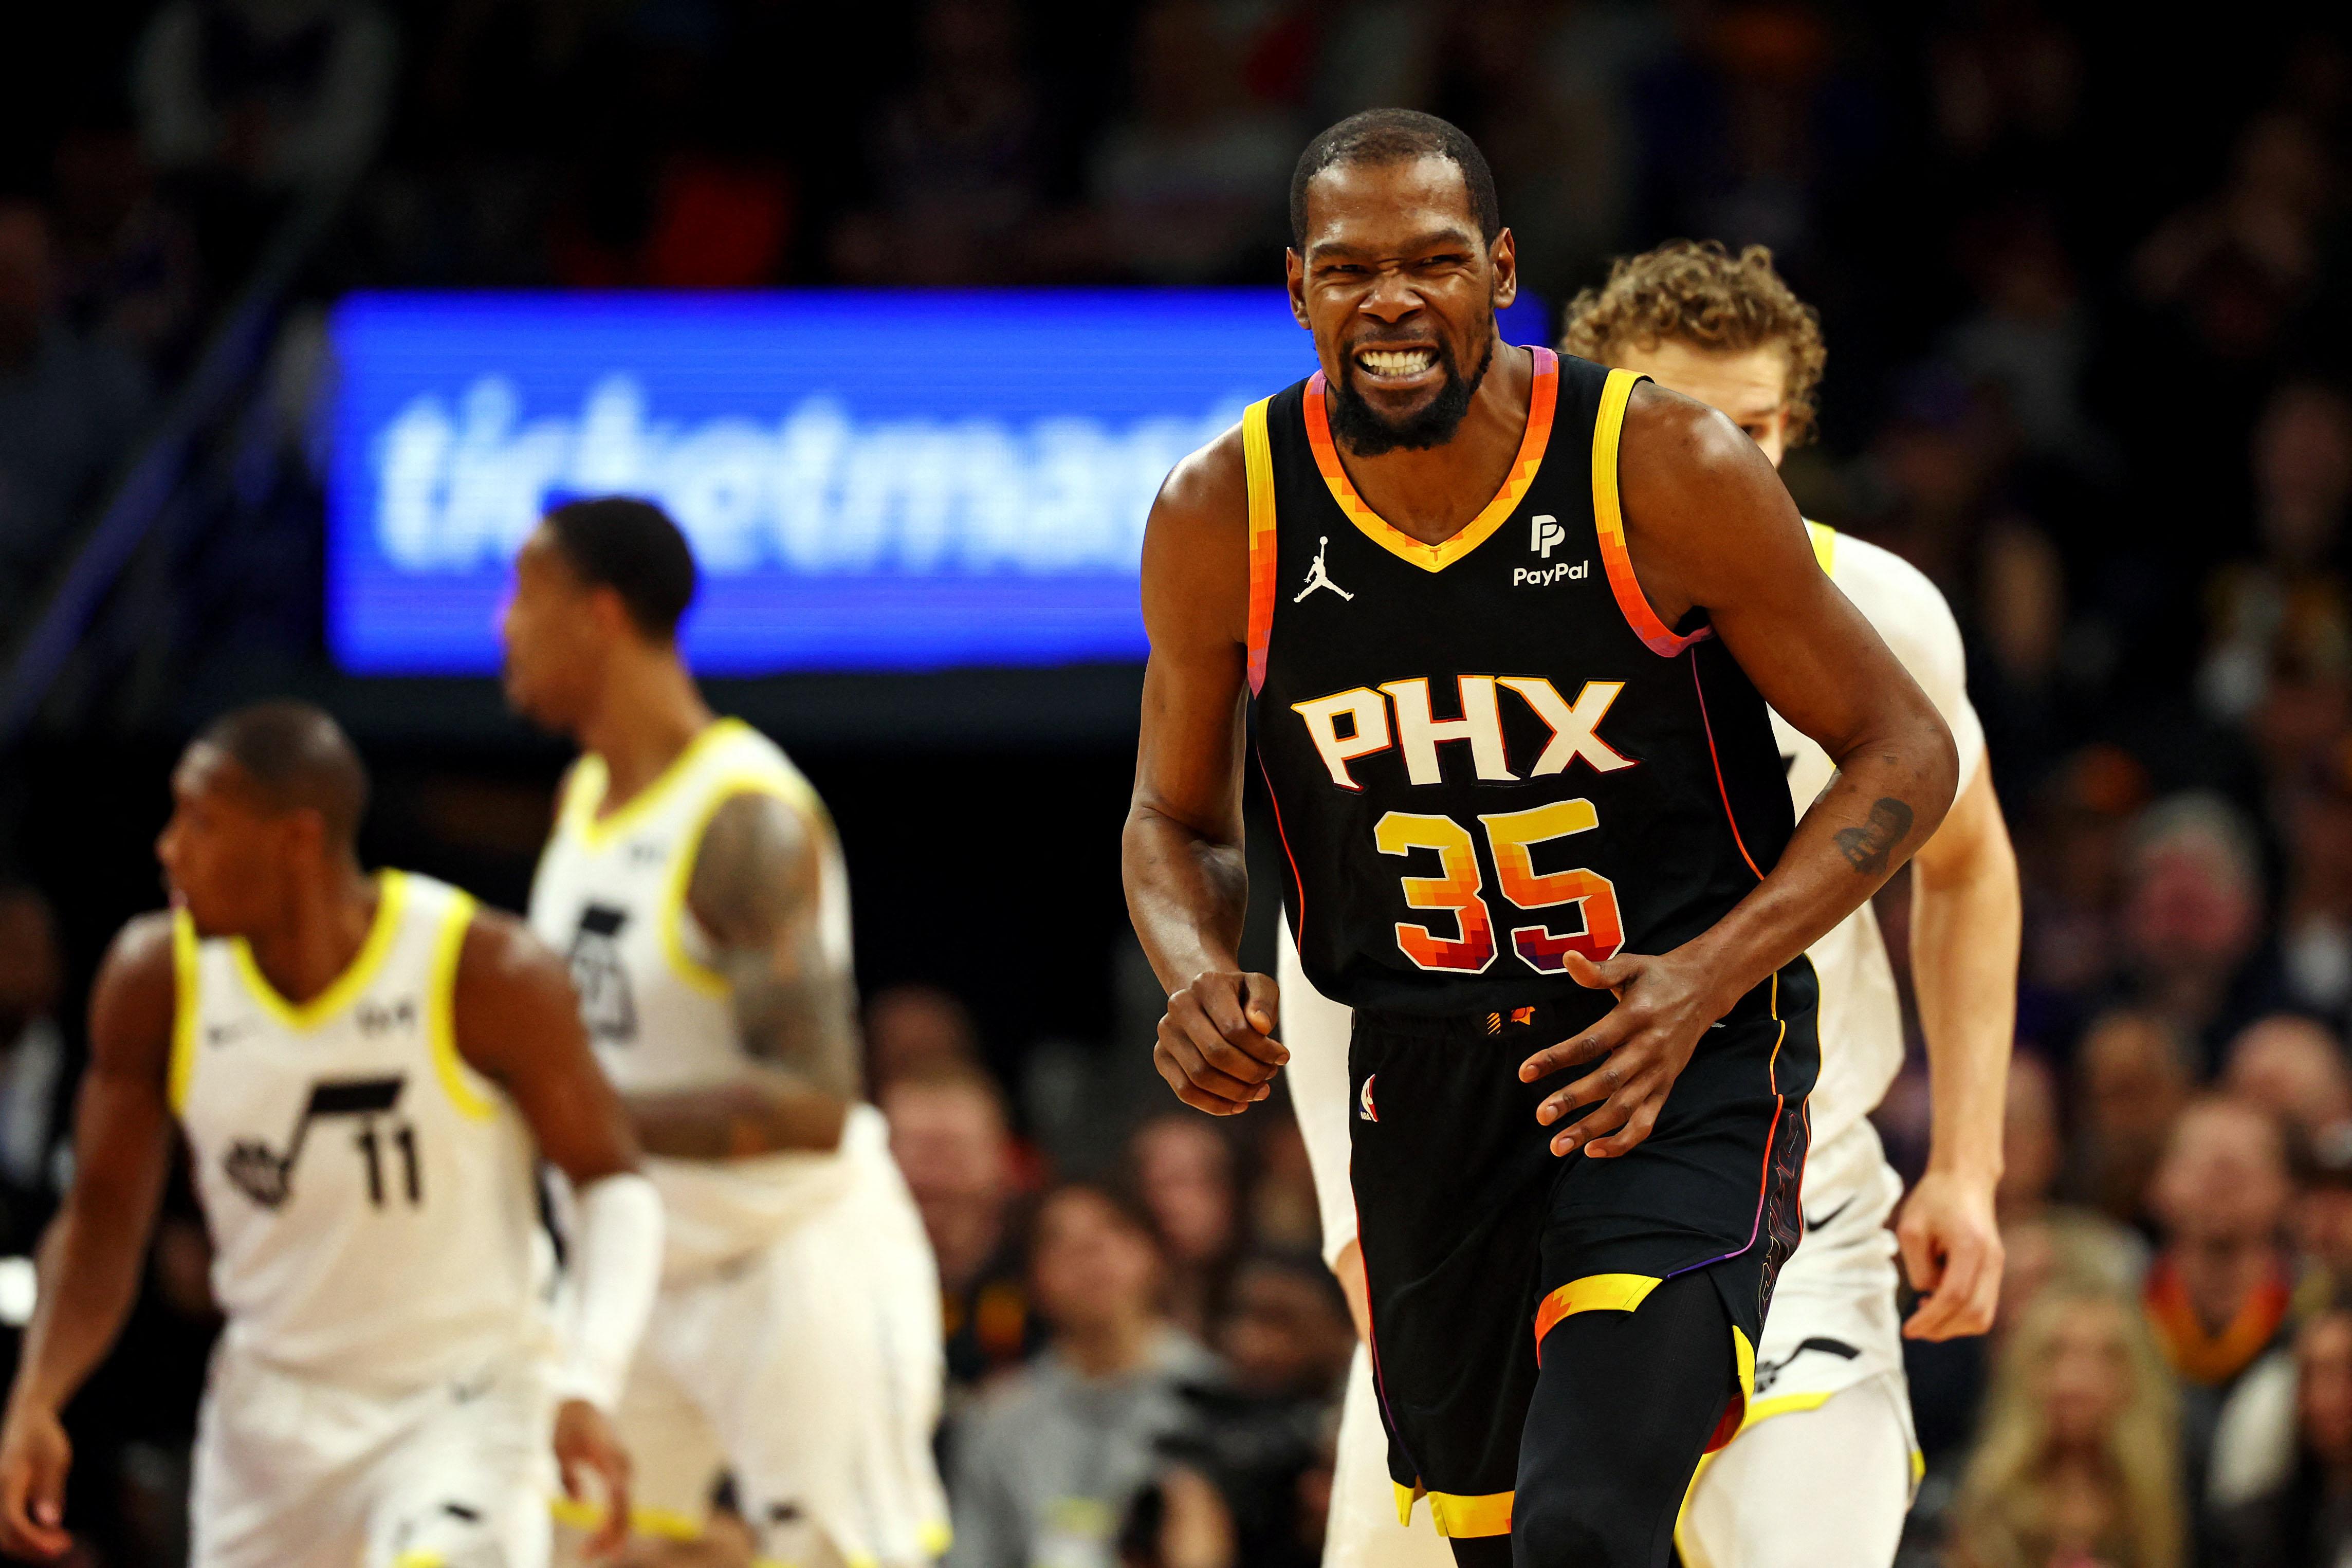 No Kevin Durant, Bradley Beal or Devin Booker for Phoenix Suns